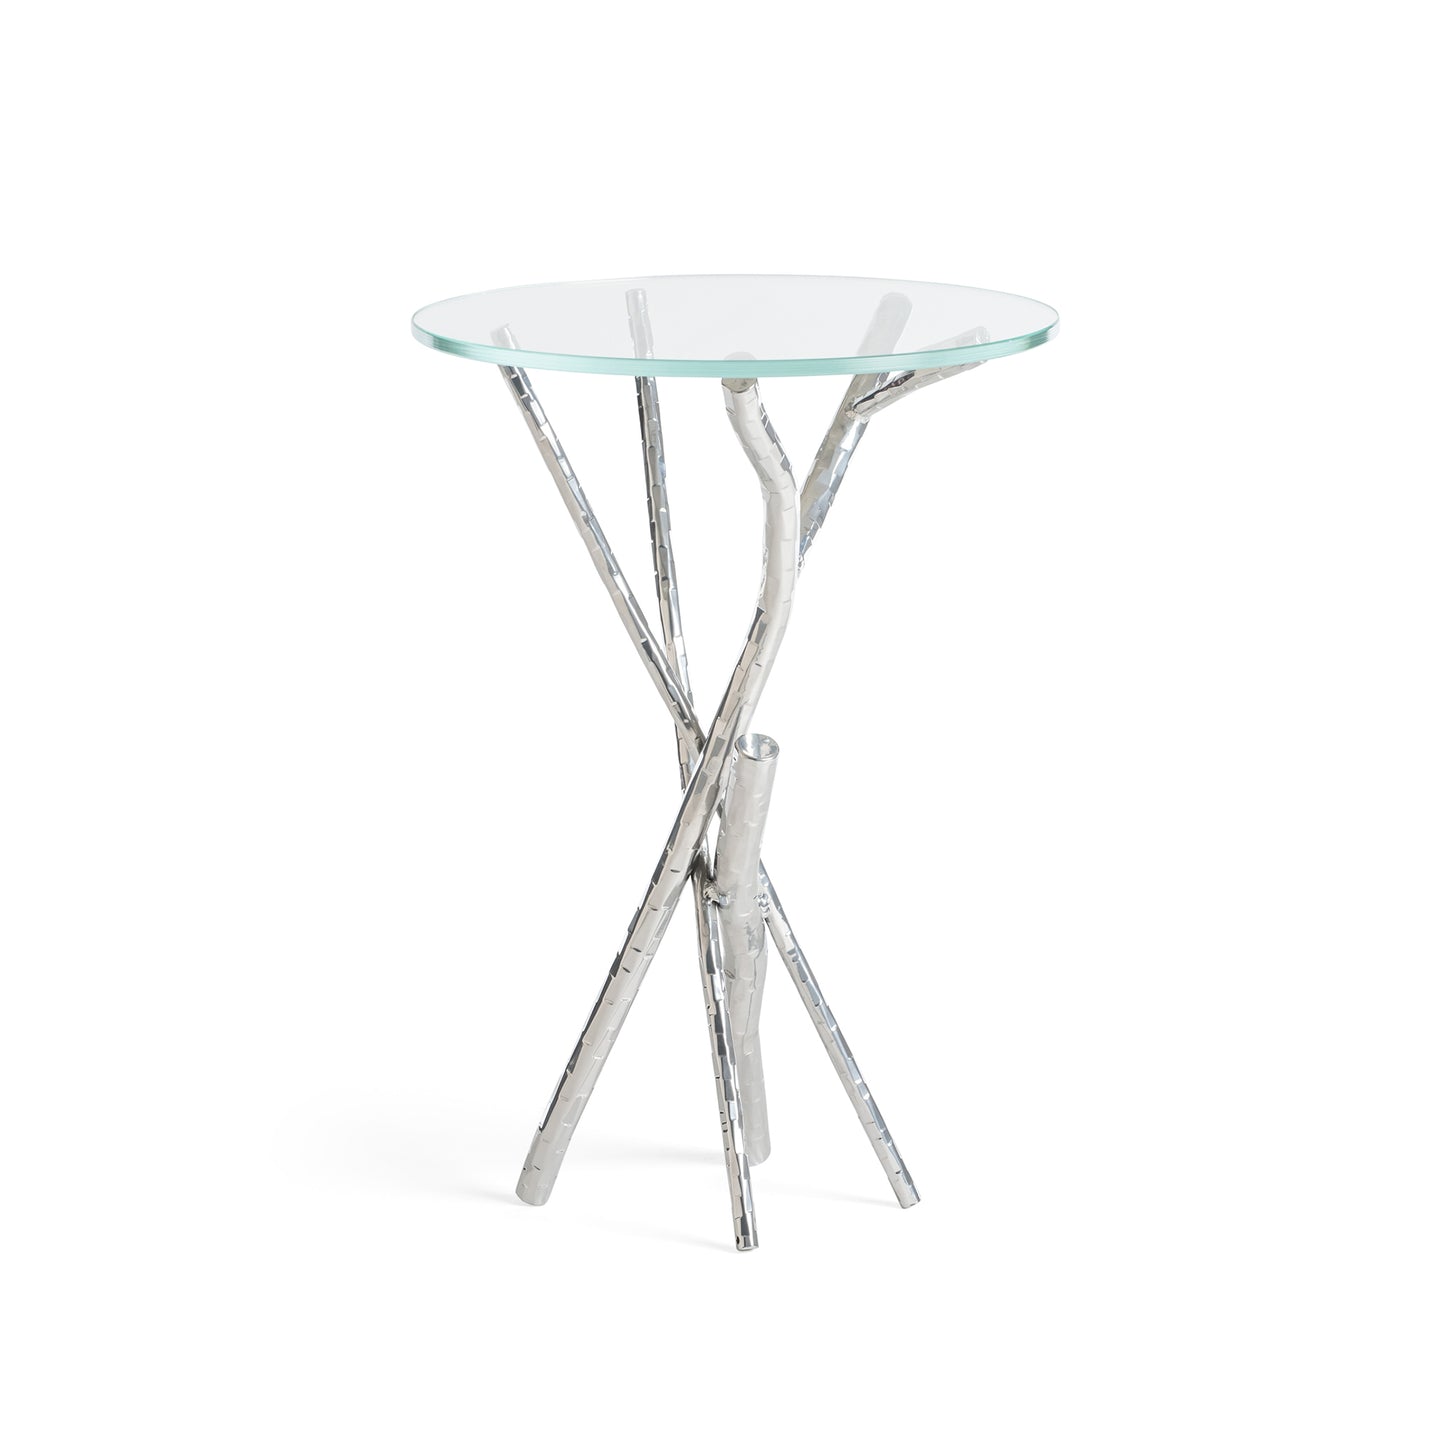 The Hubbardton Forge Brindille Accent Table is a stylish occasional table featuring a glass top and hand-hammered steel base for a unique and modern look.